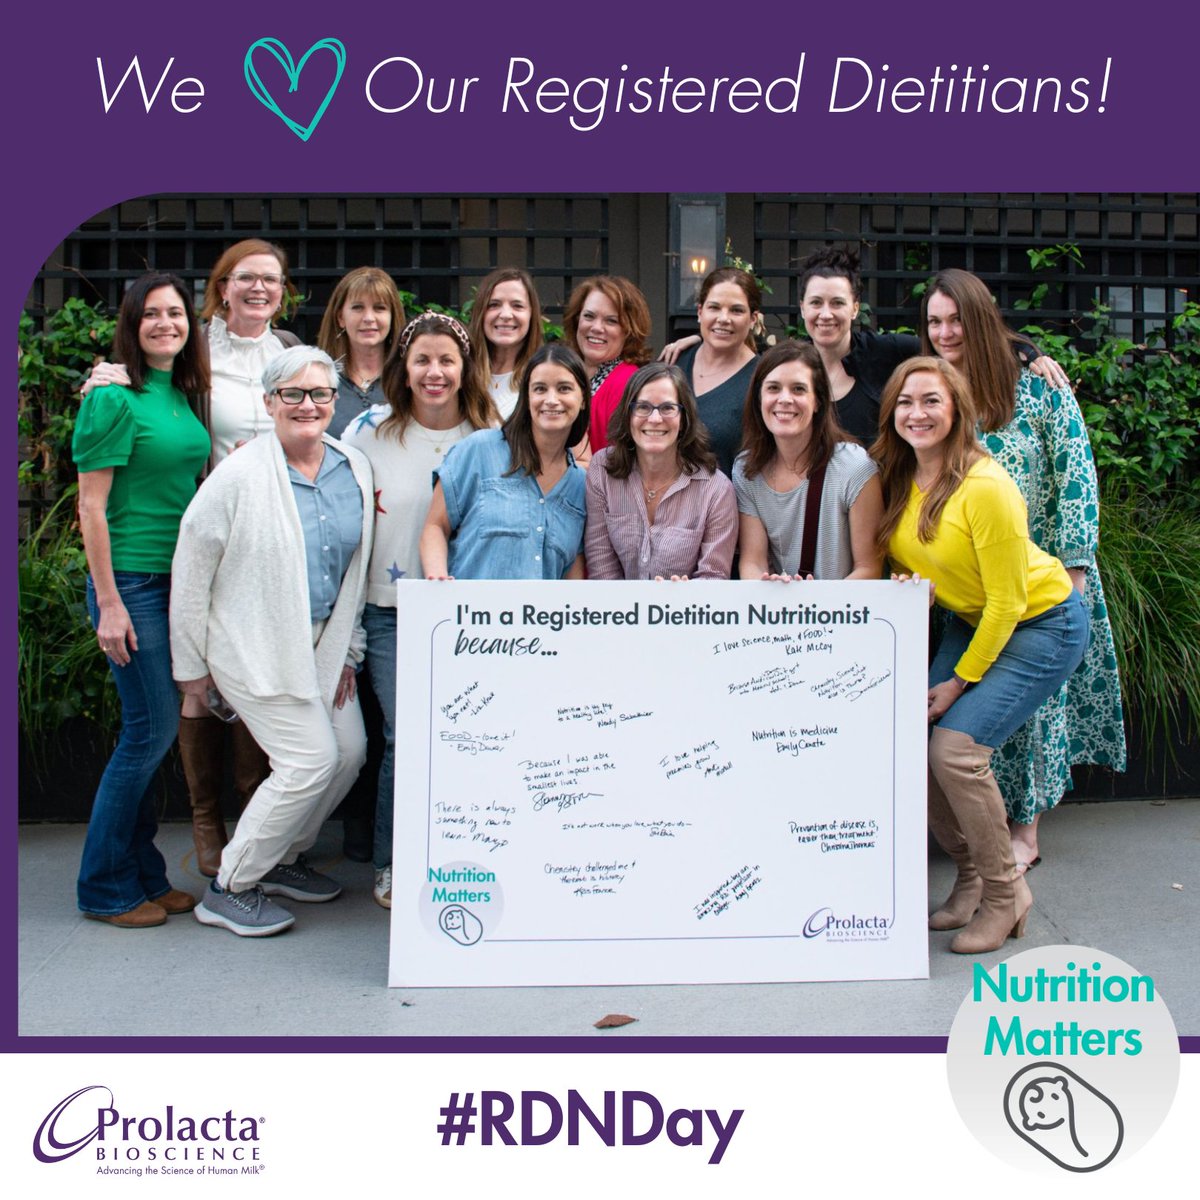 We are so lucky to have many wonderful #registereddietitians dedicated to helping make a difference in the lives of some of the smallest patients. Thank you for all you do! 
#RDNday #nicunutrition #neonatal #nicu